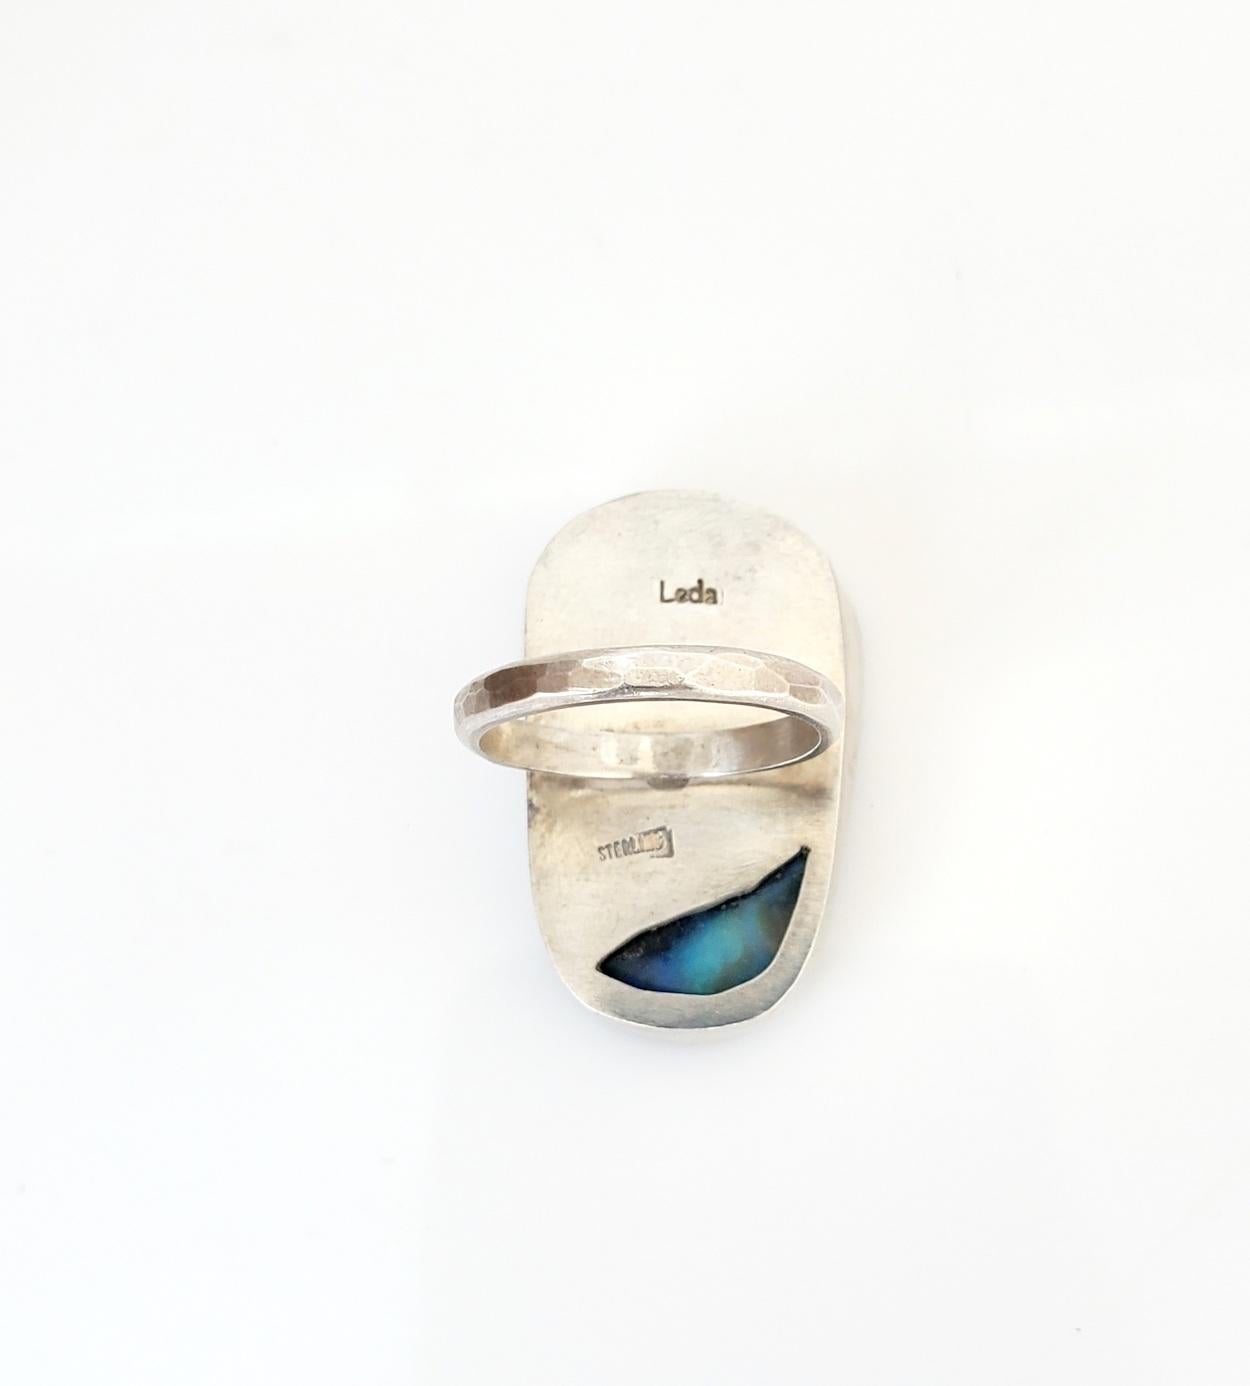  Large, one of a kind, Australian boulder opal ring. This opal measures about 38 X 18 mm. Hand set in a fine silver bezel, sterling silver back and band. Hammered band with a brush finish. Size 6.25. 
The Metaphysical Particulars: Opals offer